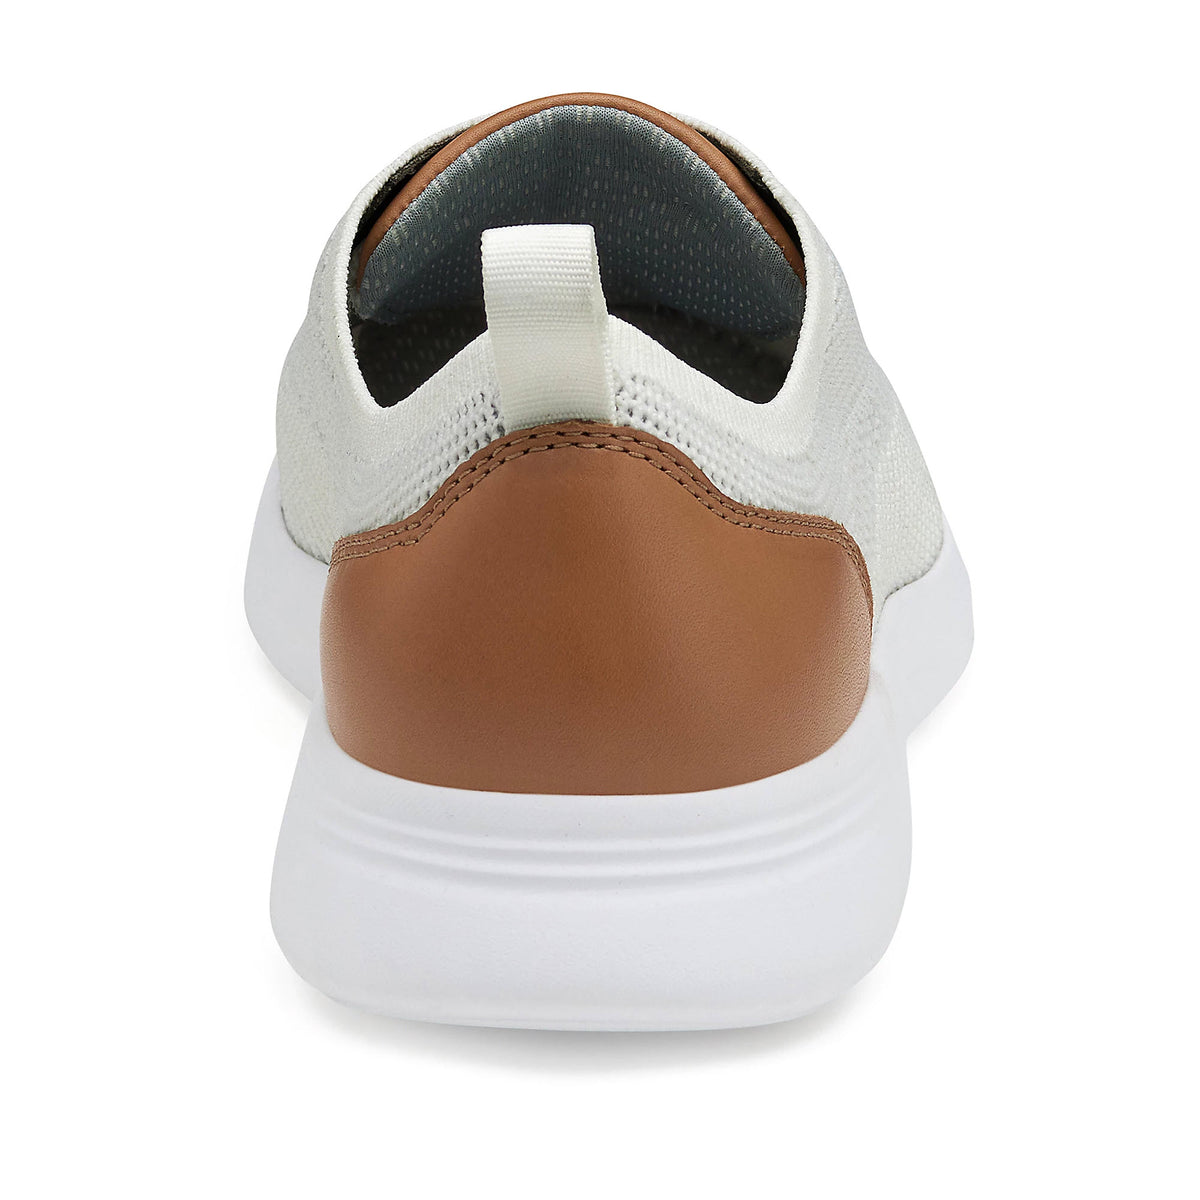 Rear view of a Johnston &amp; Murphy Amherst Knit White - Mens sport sneaker with white sole, tan leather heel patch, and a pull tab.